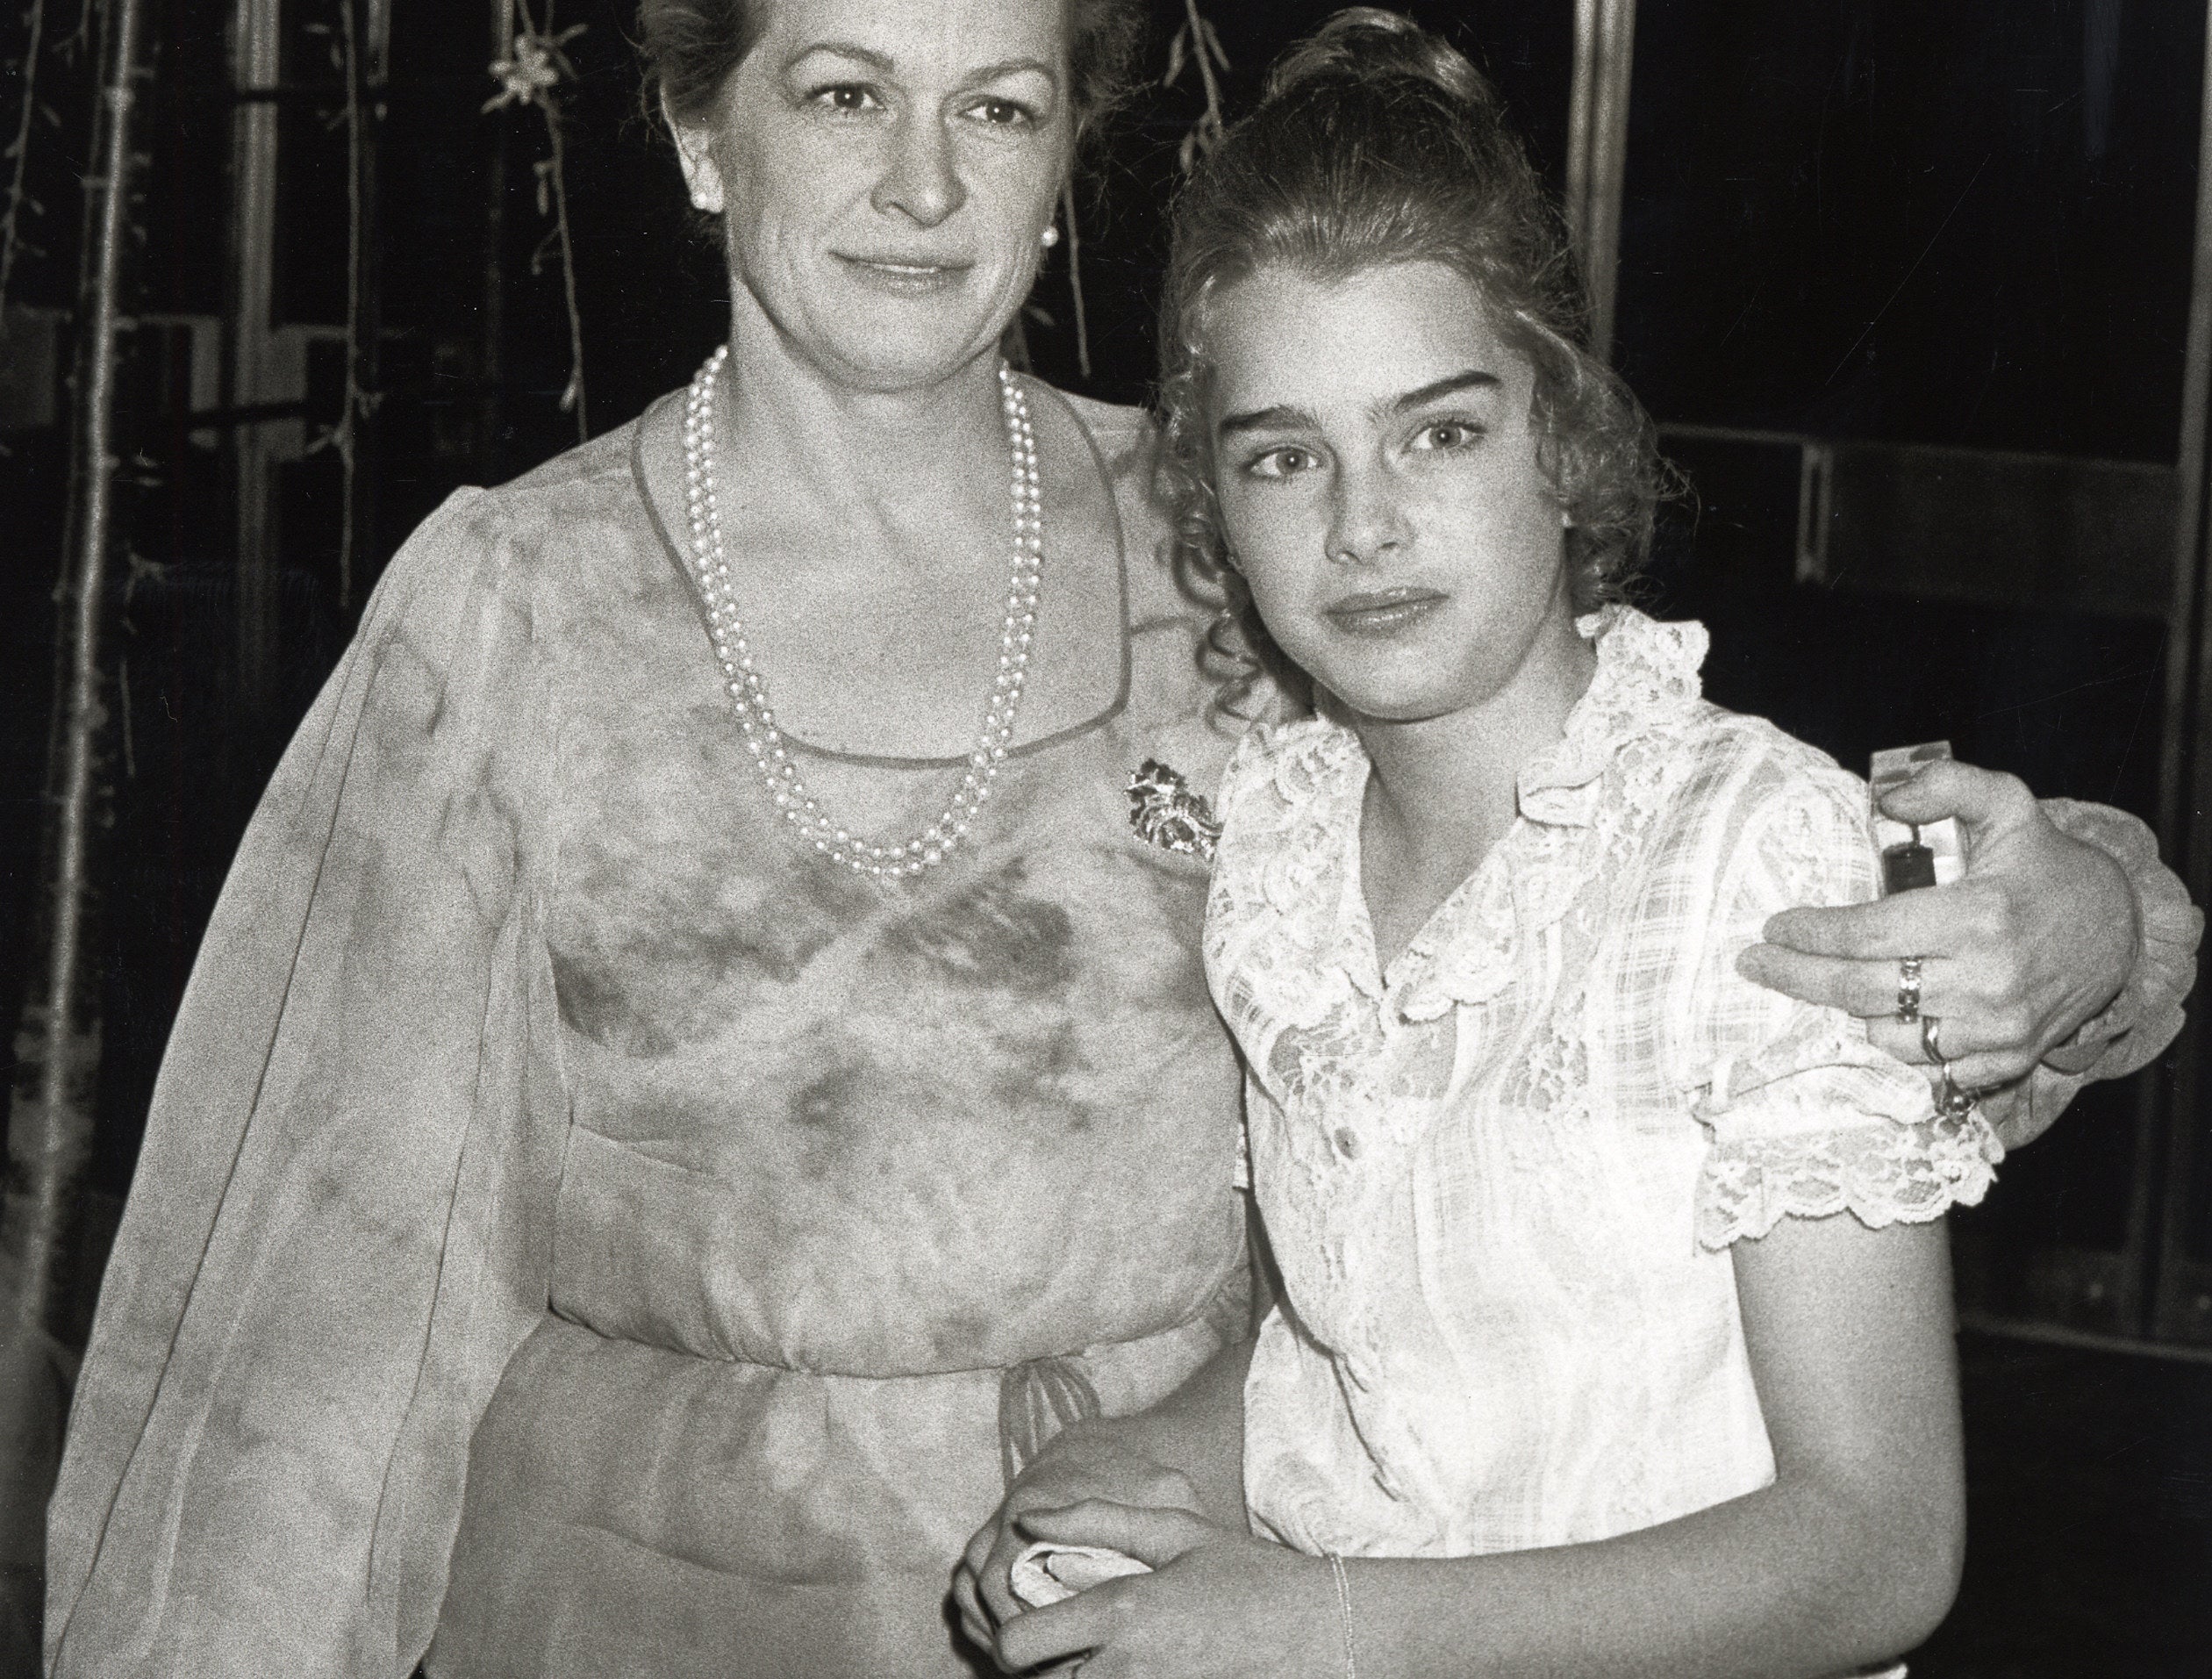 Brooke looks uncertain while posing for a photo with her mom as a teen